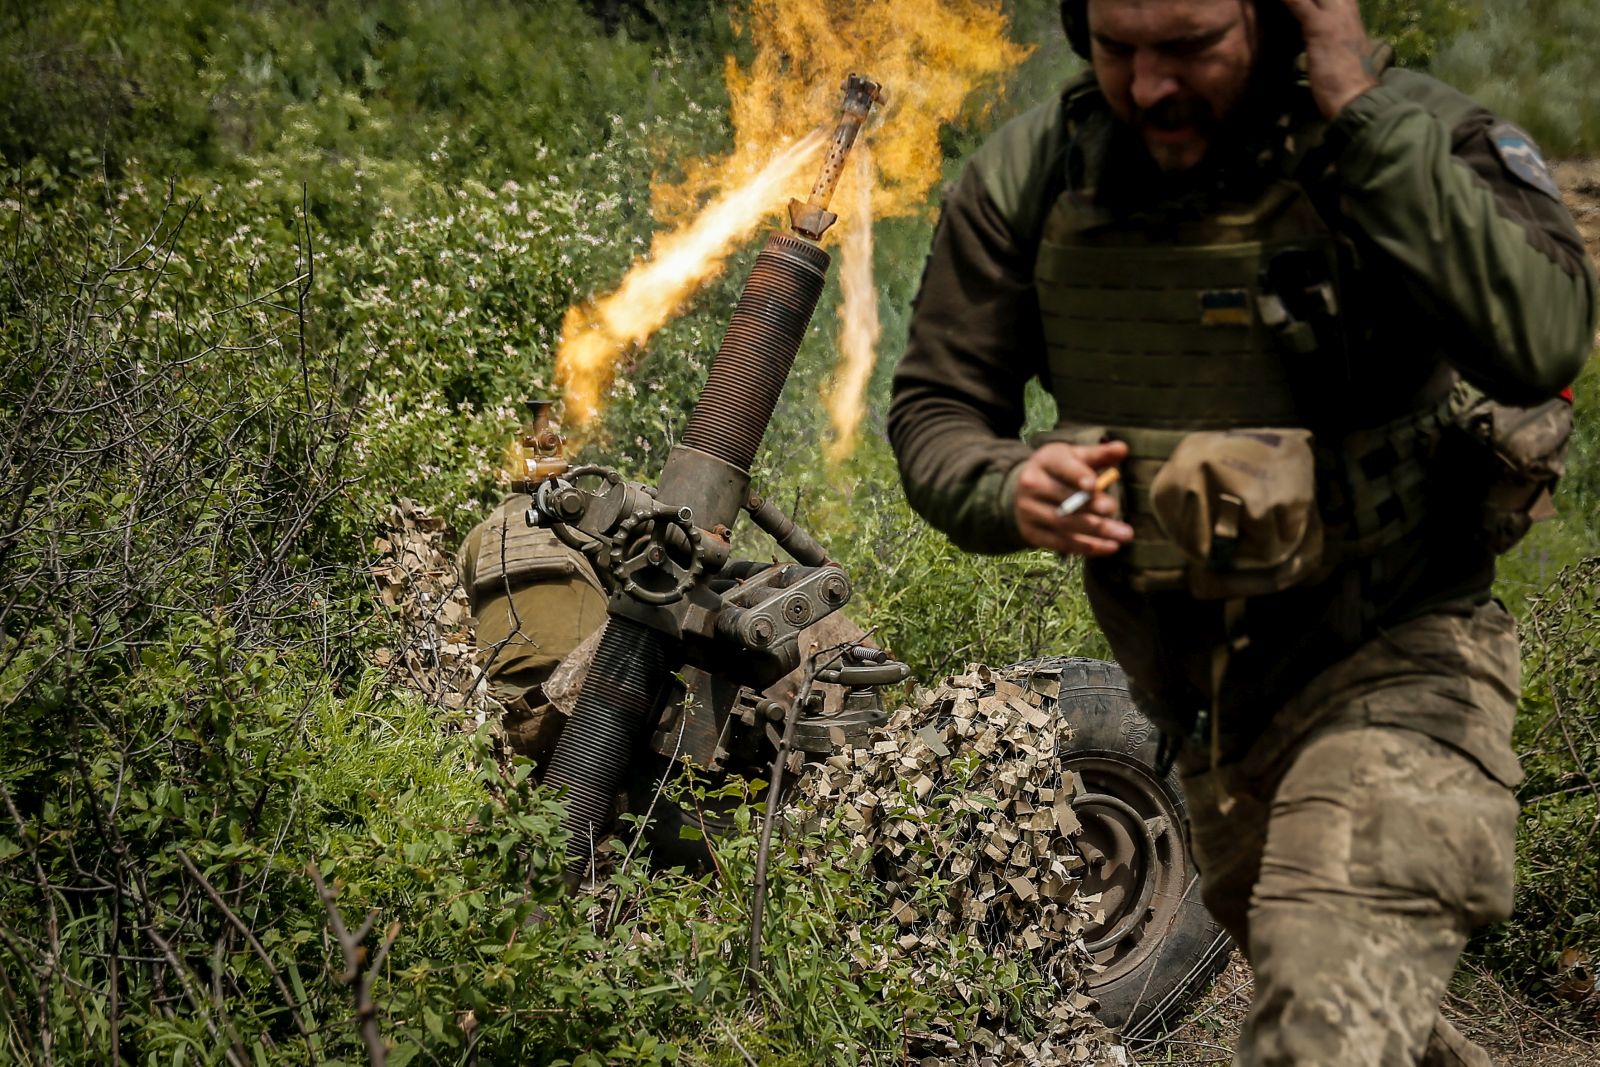 epa10648098 Members of the 10th Separate Mountain Assault Brigade 'Edelweiss', a unit of the Ukrainian Ground Forces, fire a mortar at an undisclosed location in the Bakhmut direction, Donetsk region, eastern Ukraine, 23 May 2023, amid the Russian invasion. The frontline city of Bakhmut, a key target for Russian forces, has seen heavy fighting for months. Russian troops on 24 February 2022, entered Ukrainian territory, starting a conflict that has provoked destruction and a humanitarian crisis.  EPA/OLEG PETRASYUK